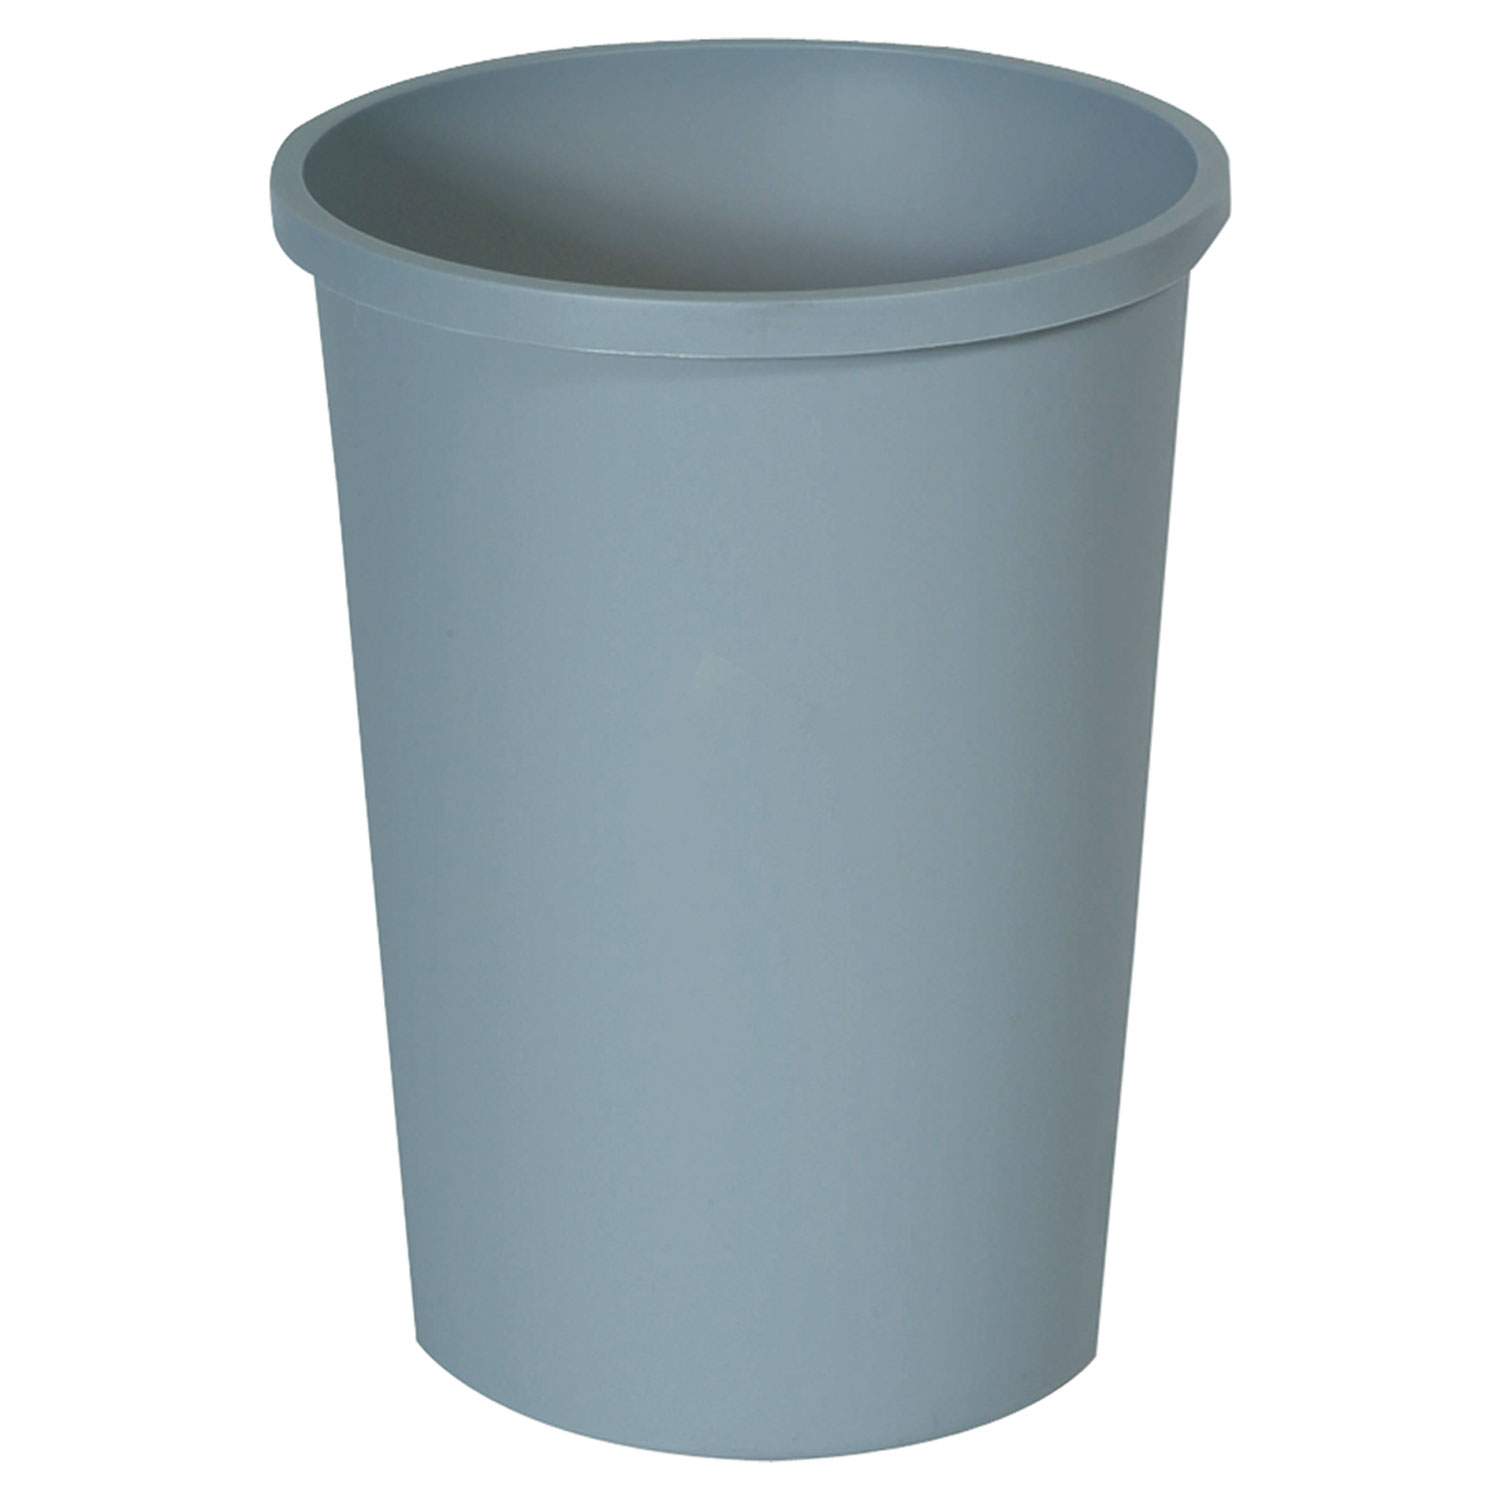 Untouchable Waste Container, Round, Plastic, 11 gal, Gray